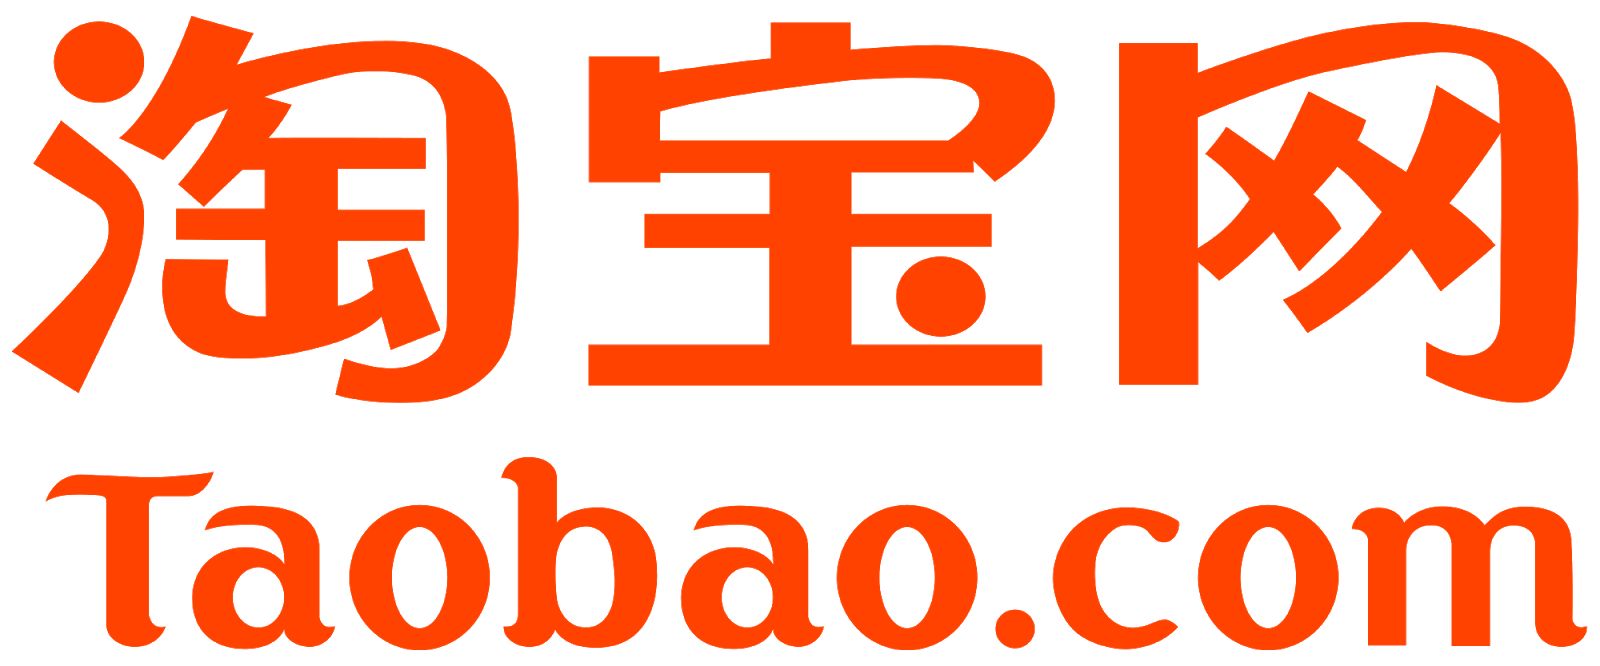 How to Buy Directly From Taobao: The Complete Guide 2020